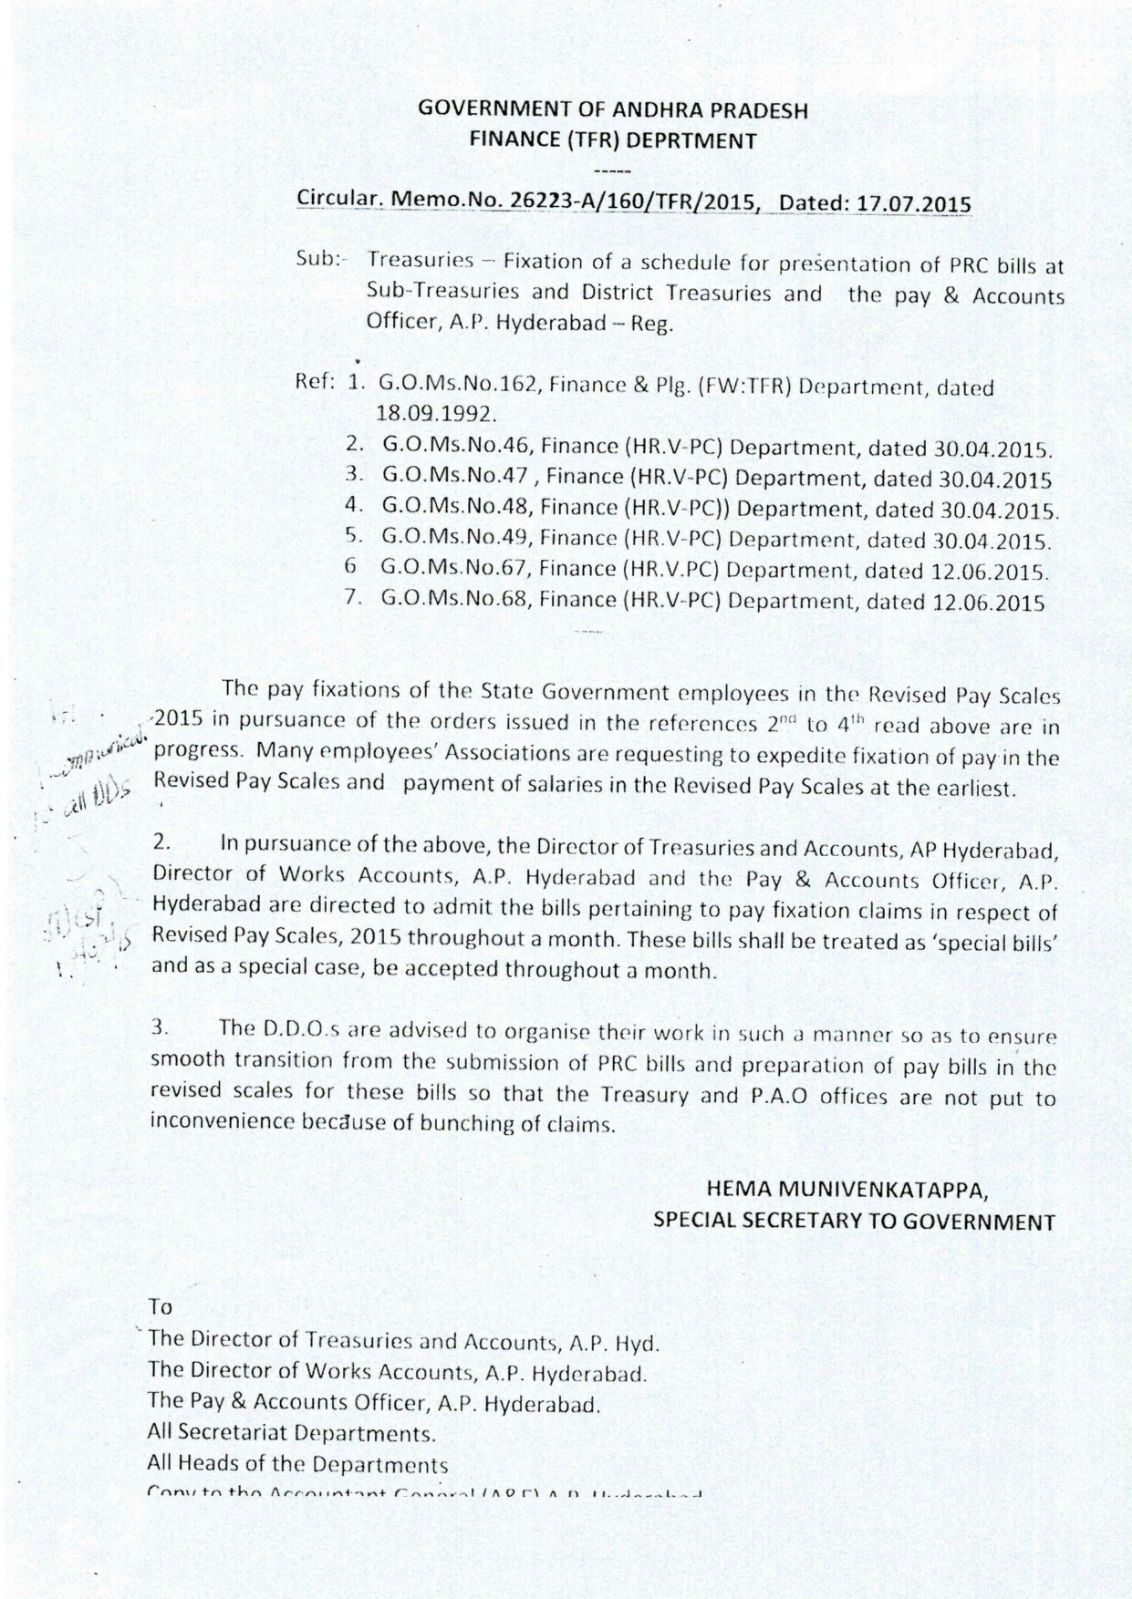  Memo 26223 Admit PRC bills in  Revised Pay Scales 2015 Throughout a Month 